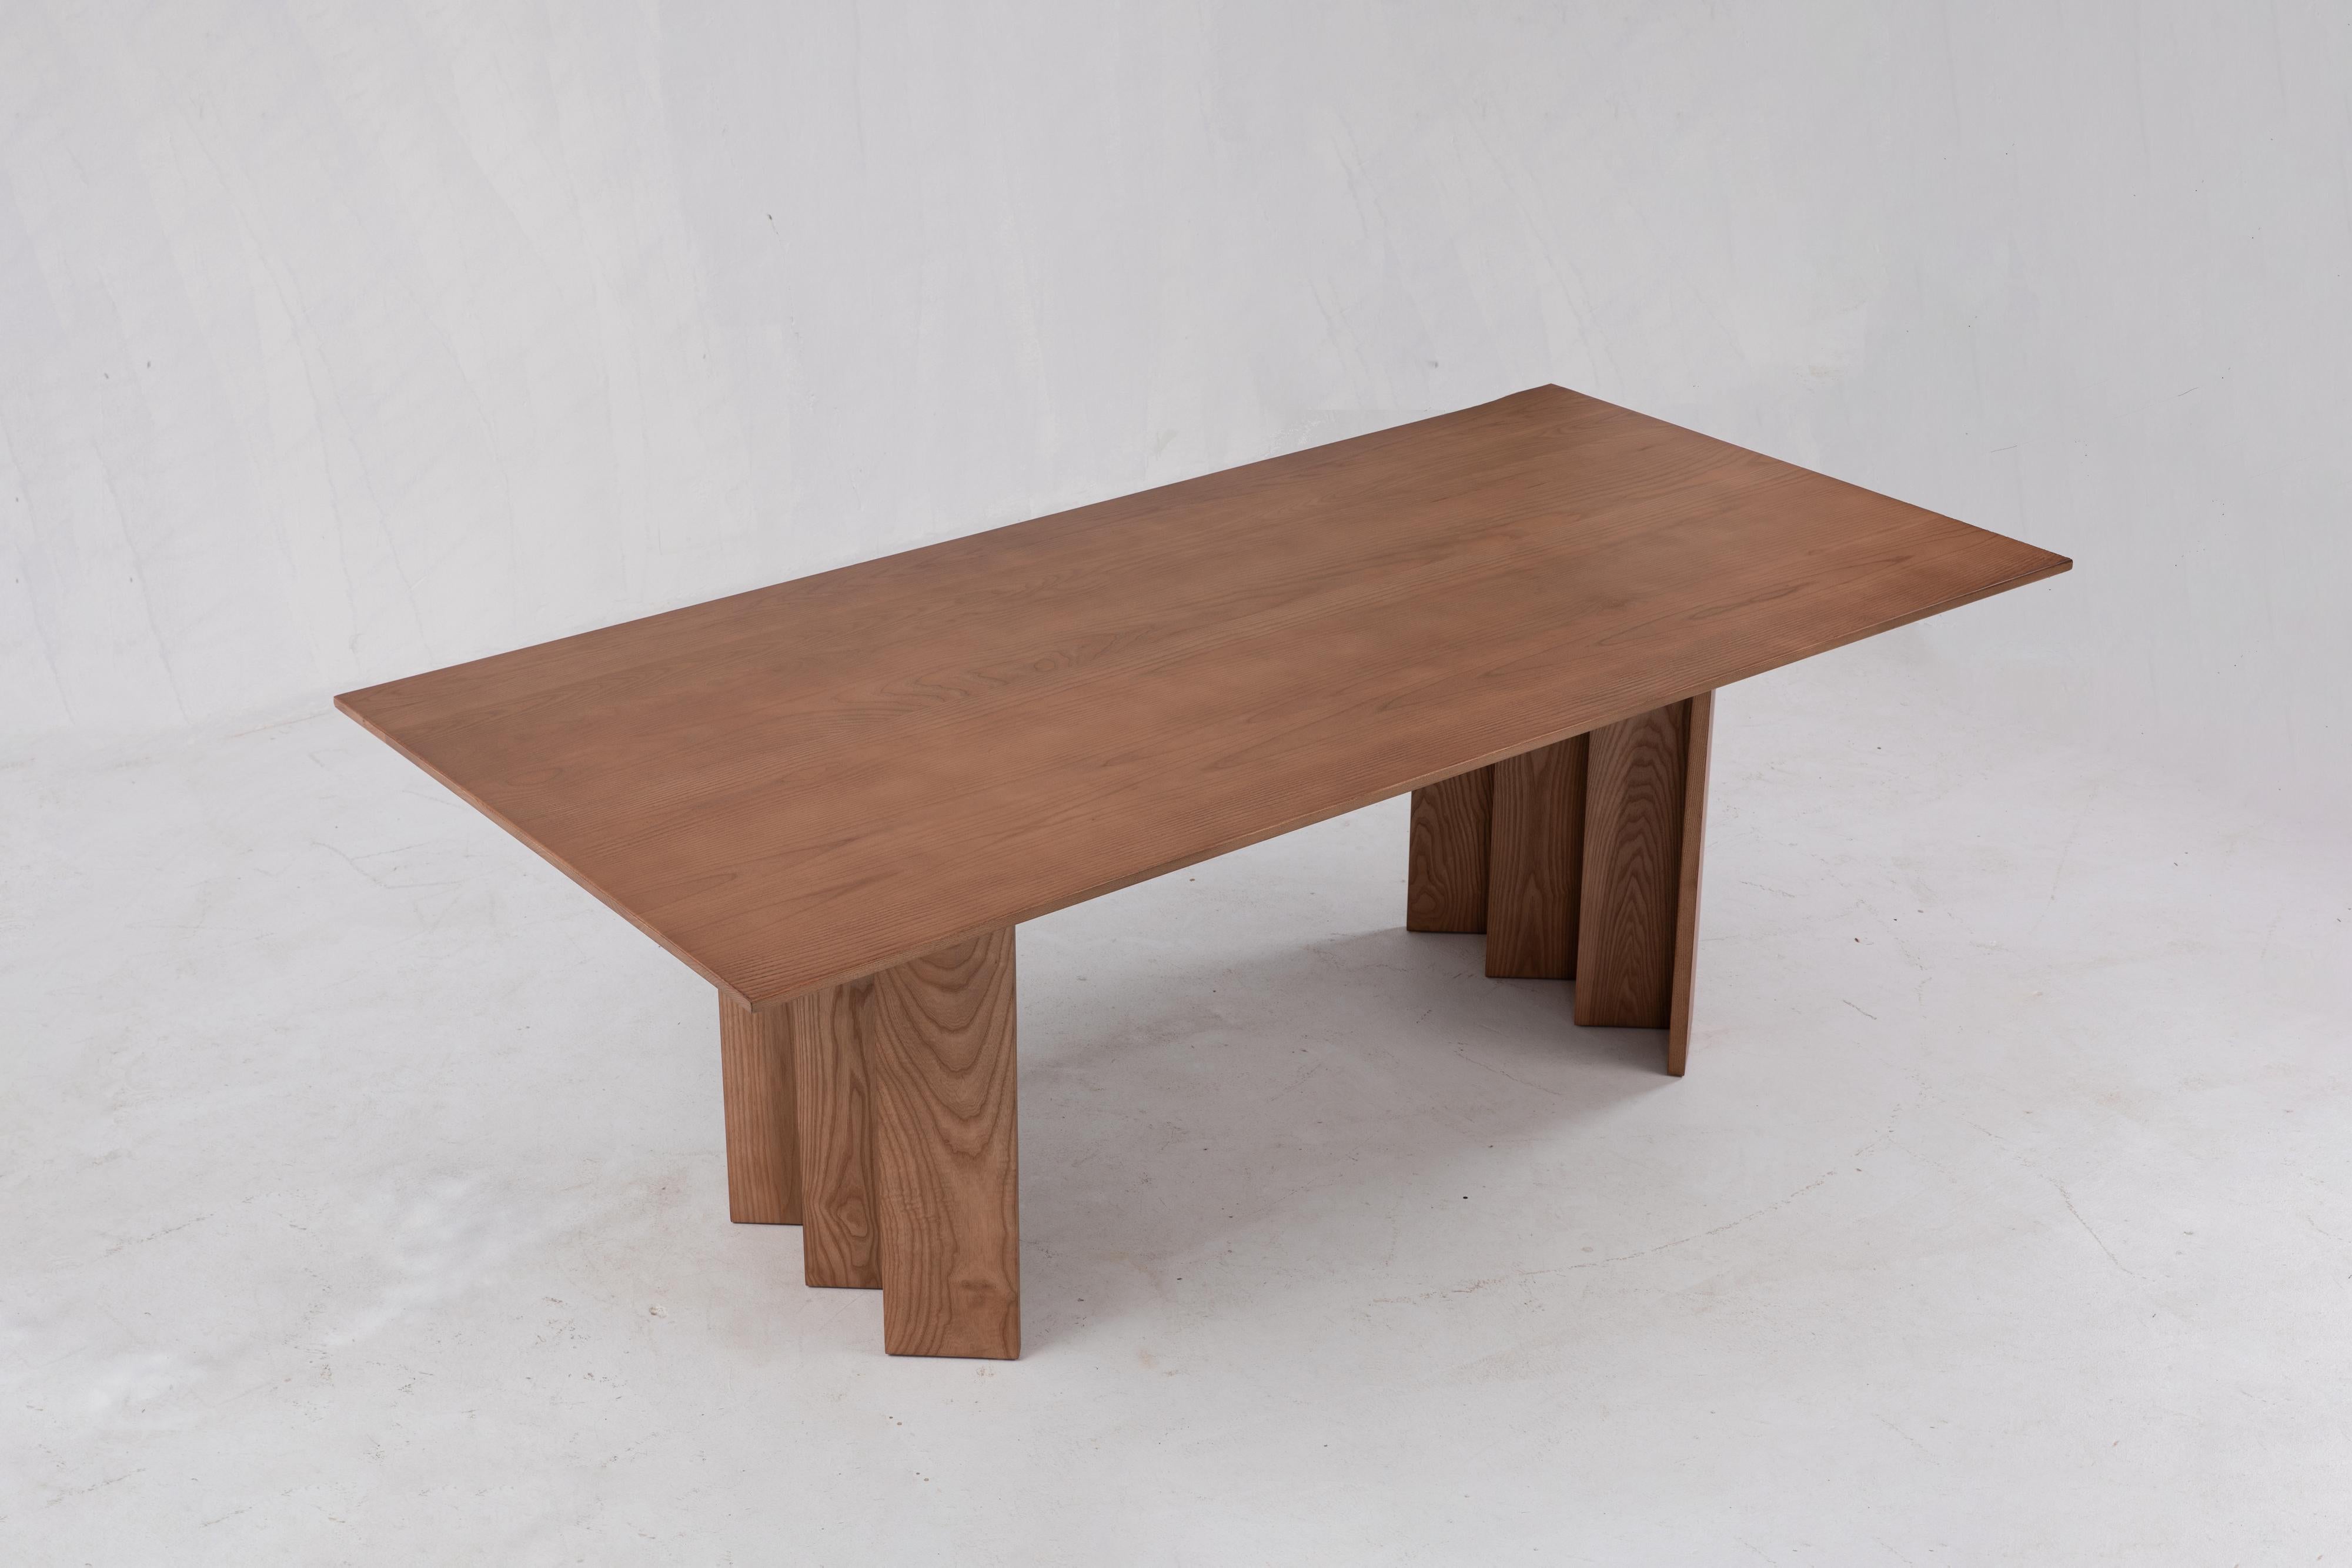 Sun at six is a contemporary furniture design studio working with traditional Chinese joinery masters to handcraft our pieces using traditional joinery. 

Great furniture begins with quality materials: raw, sustainably sourced white oak, our